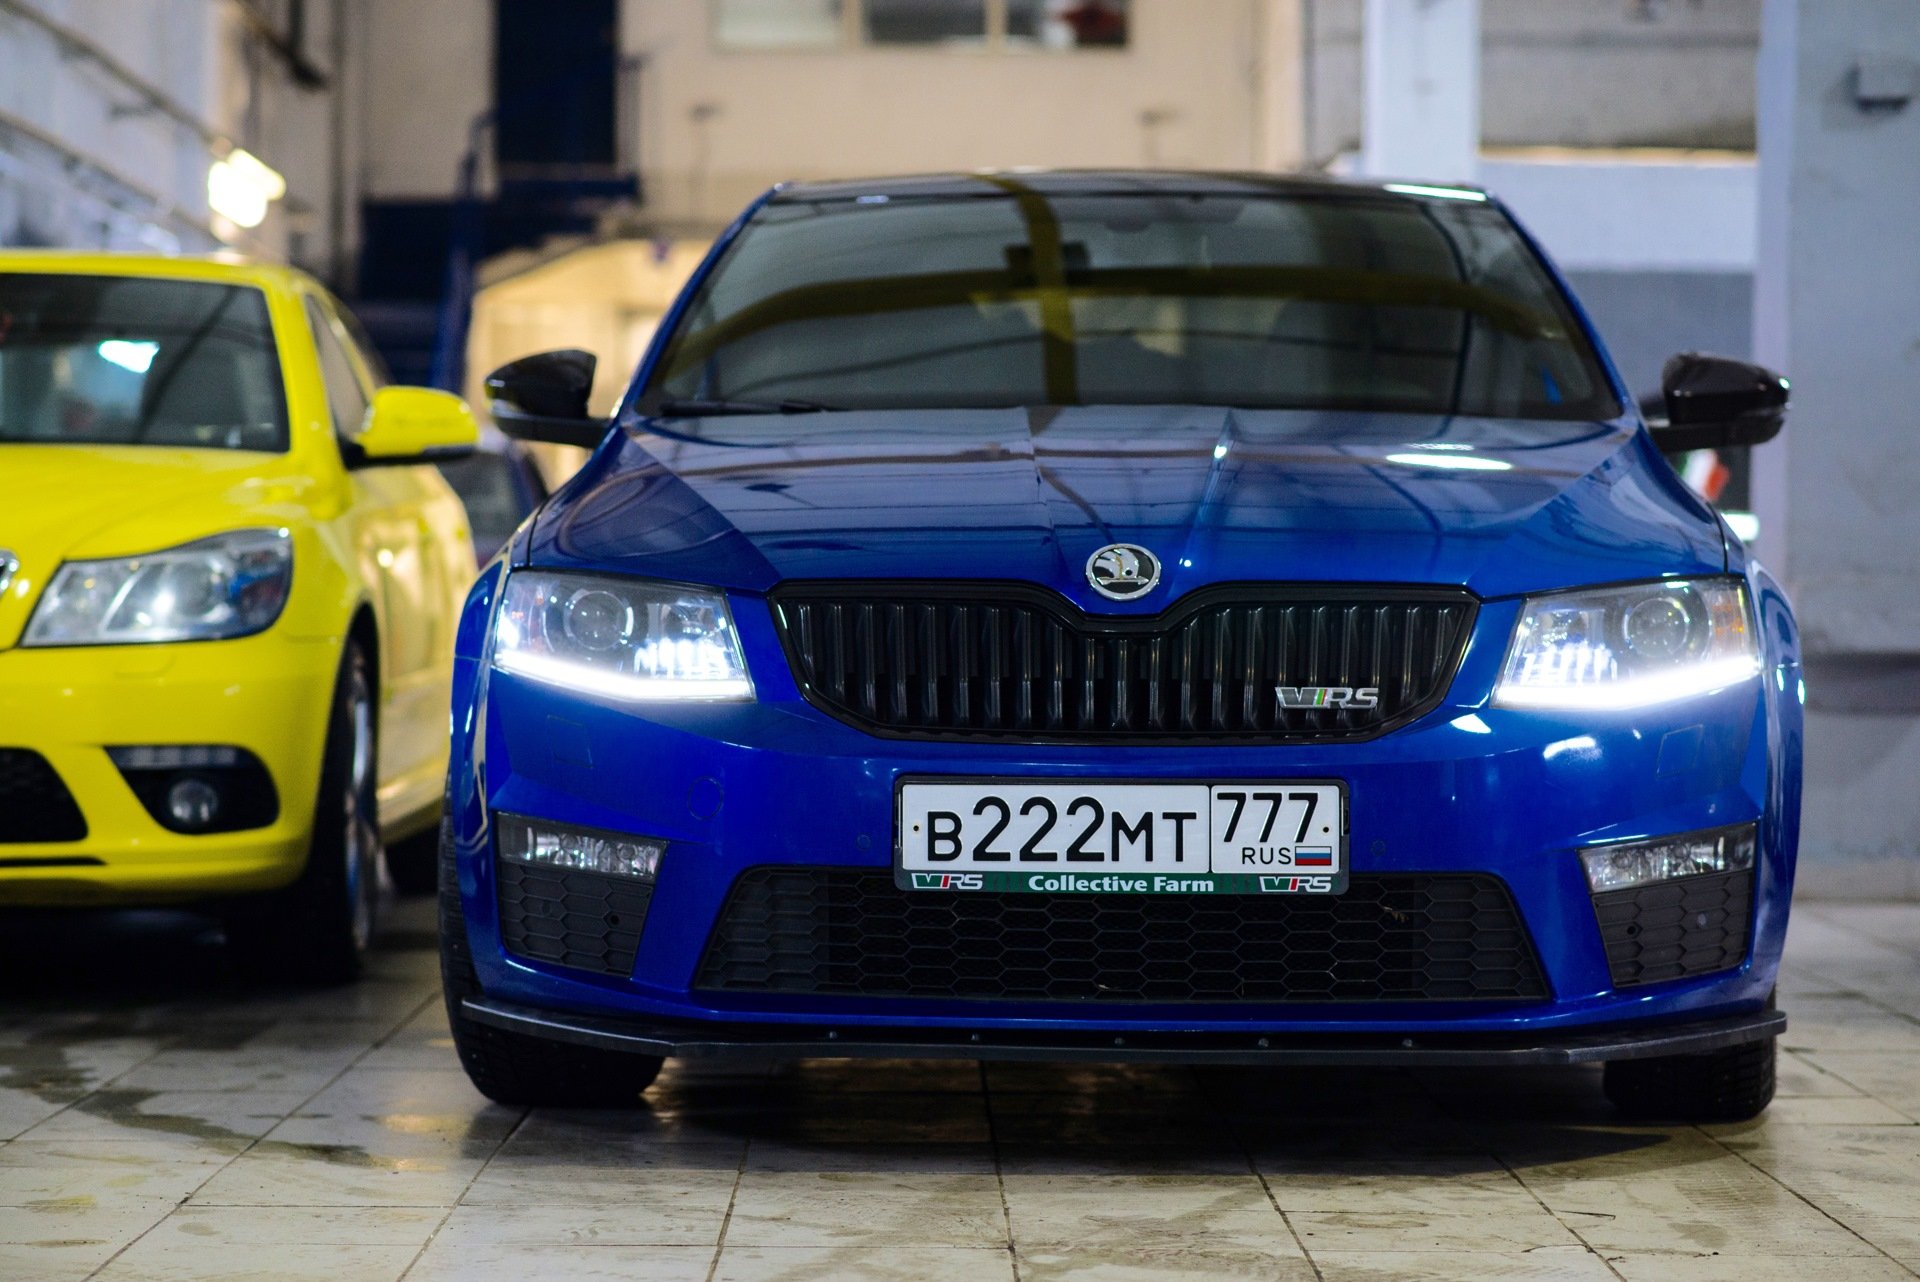 Skoda octavia rs 2014. Skoda Octavia RS 2. Skoda Octavia RS 2022.